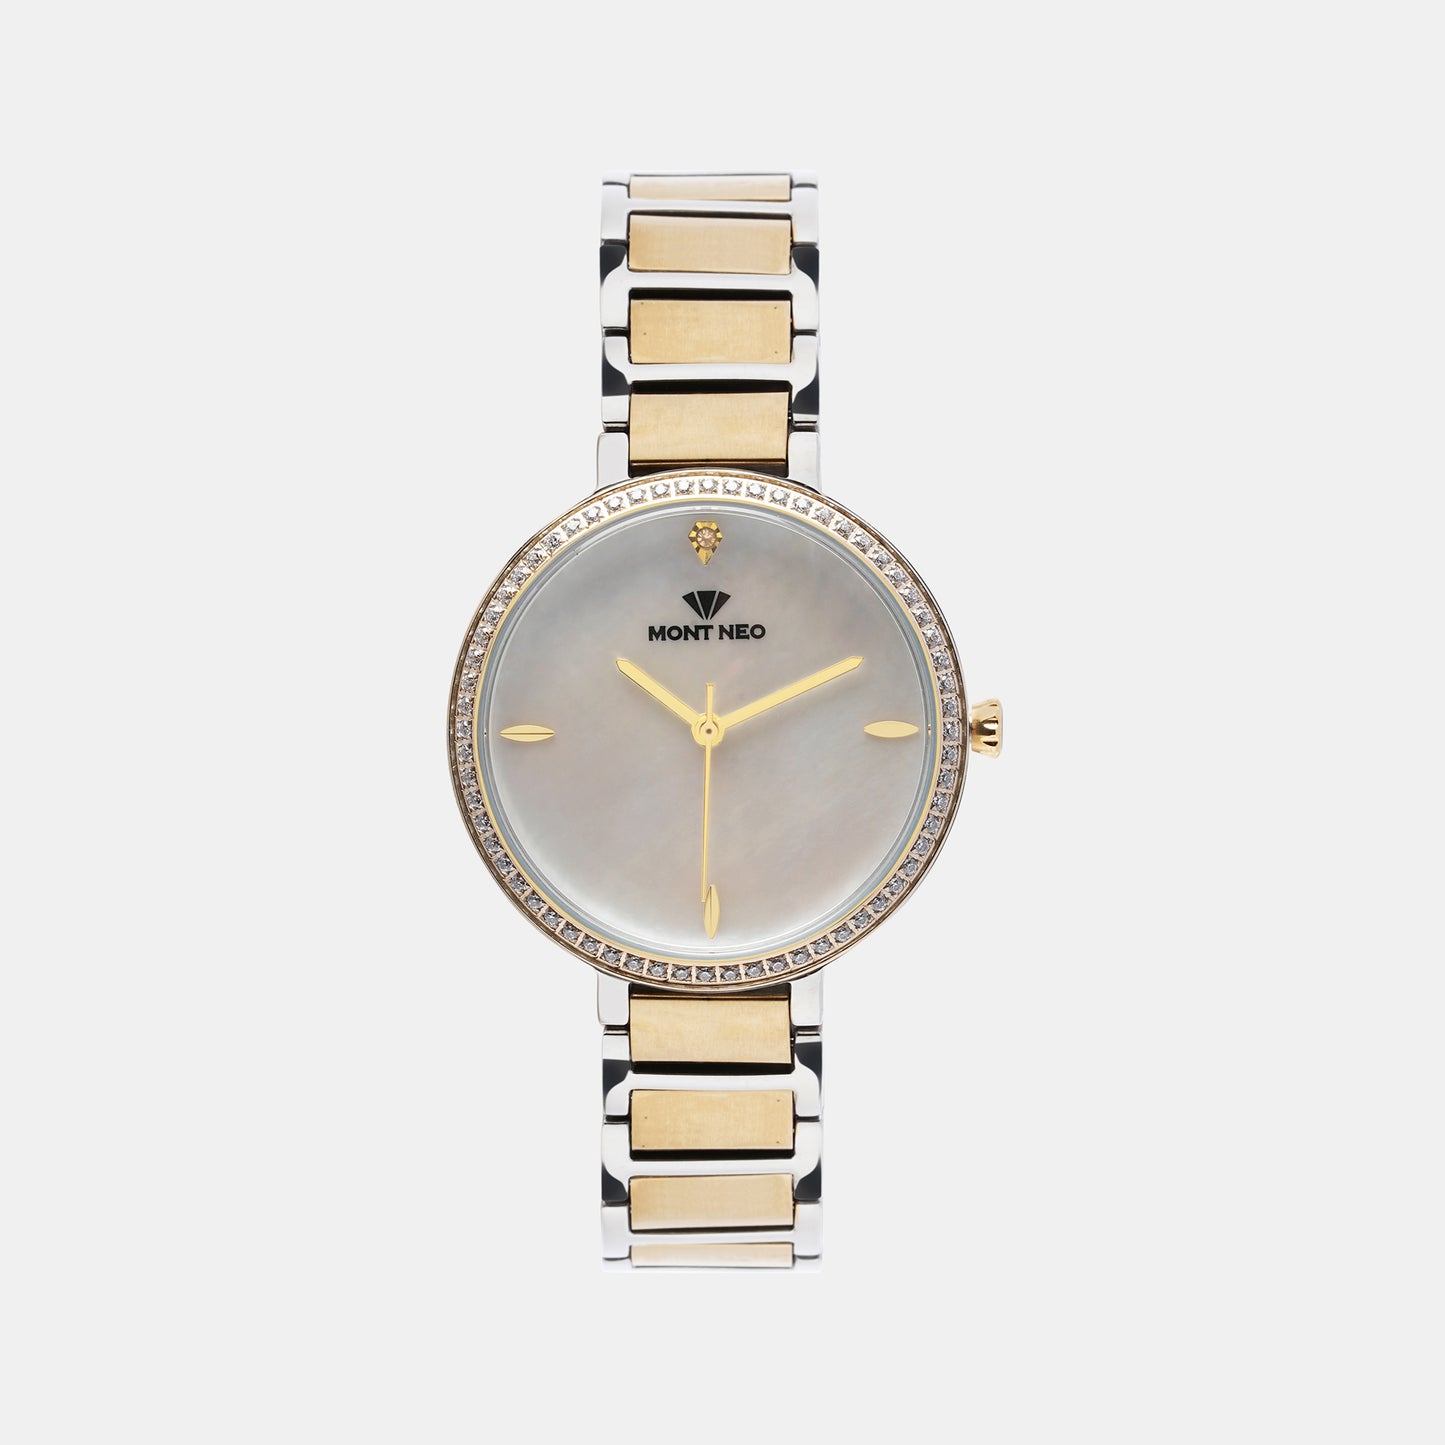 Timeless Silver Analog Female Stainless Steel Watch 7507T-M2201